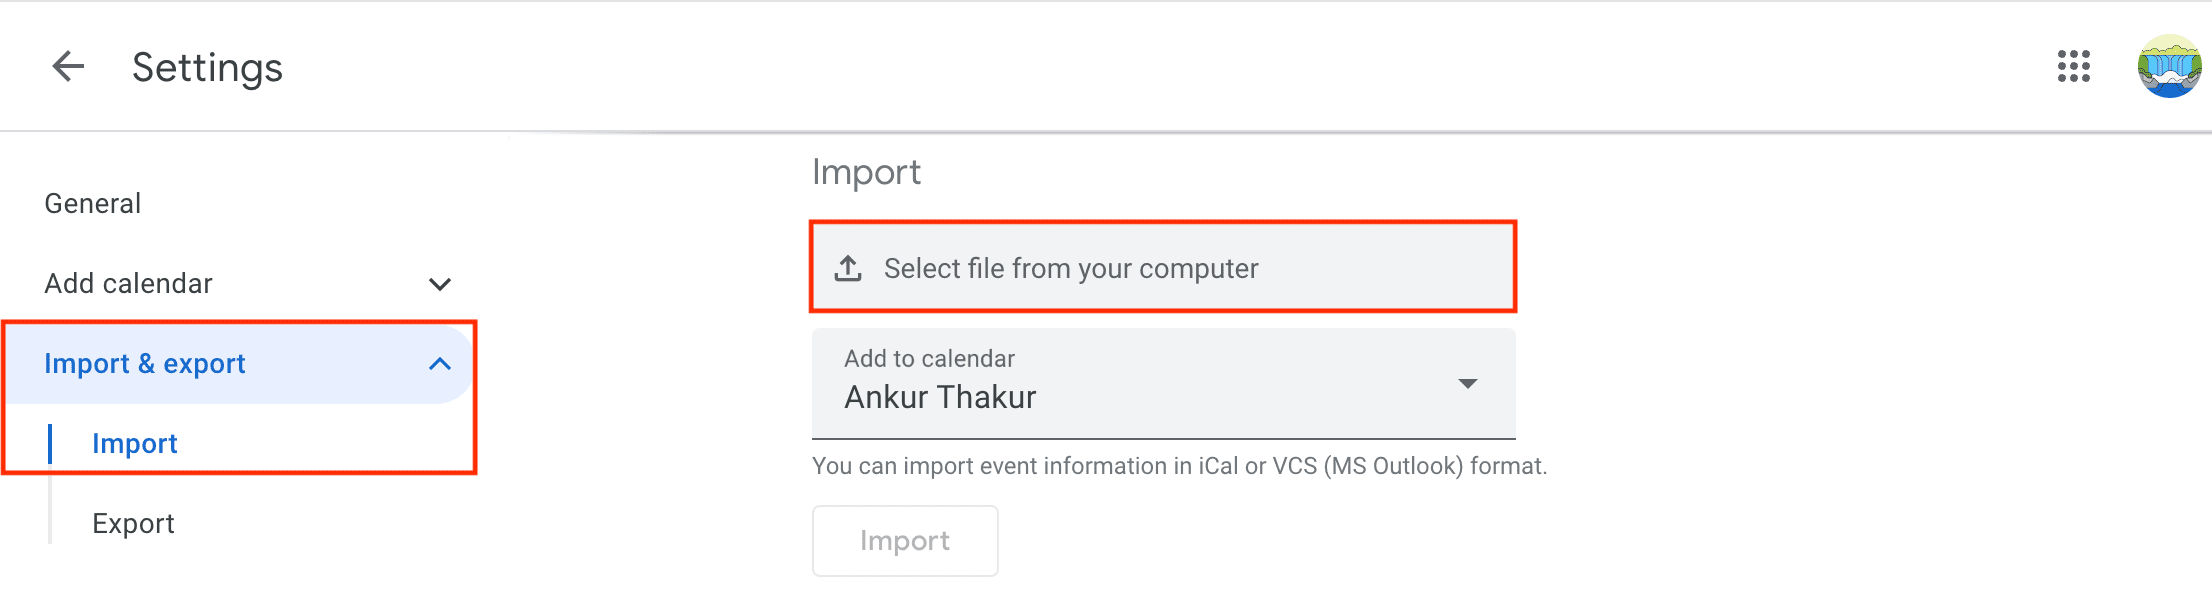 Select file from your computer to import it to Google Calendar